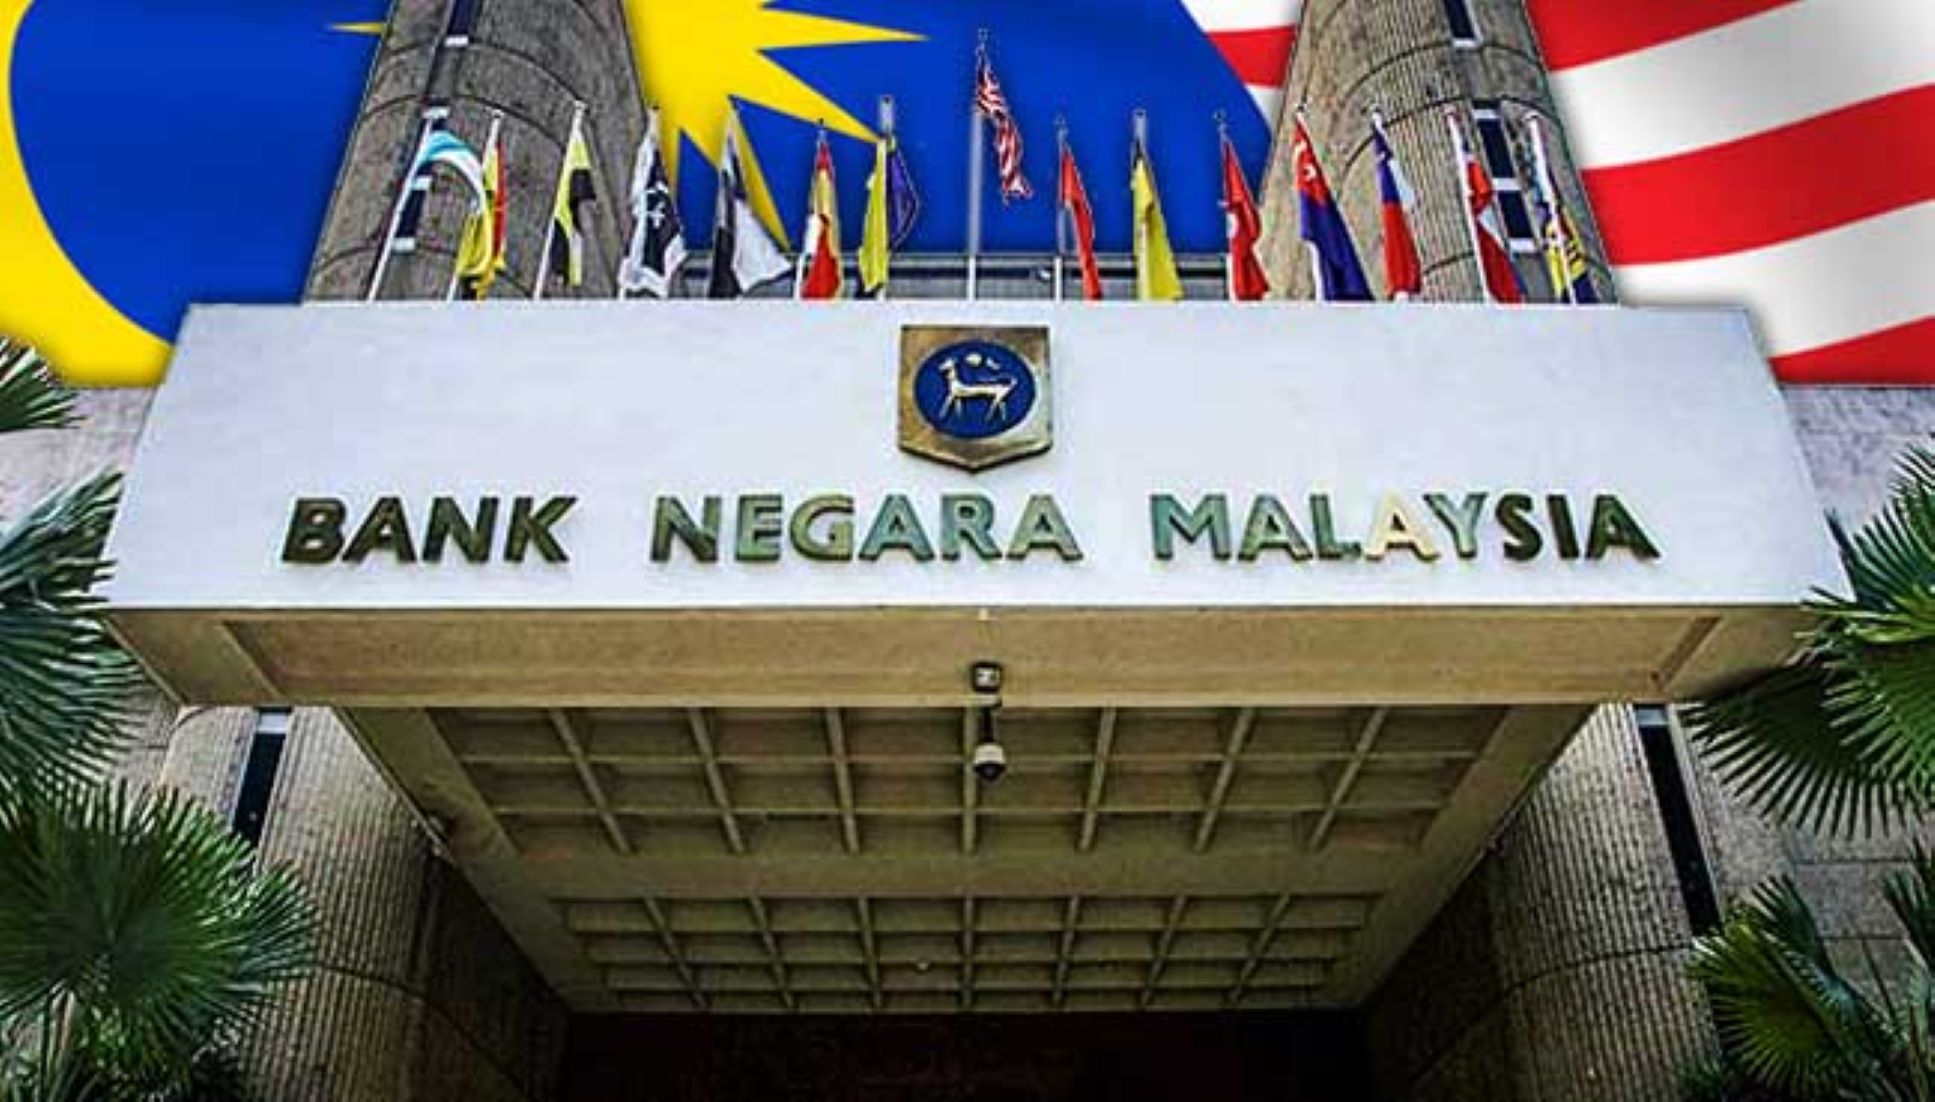 Malaysia’s Central Bank Reaffirms Support For MSMEs